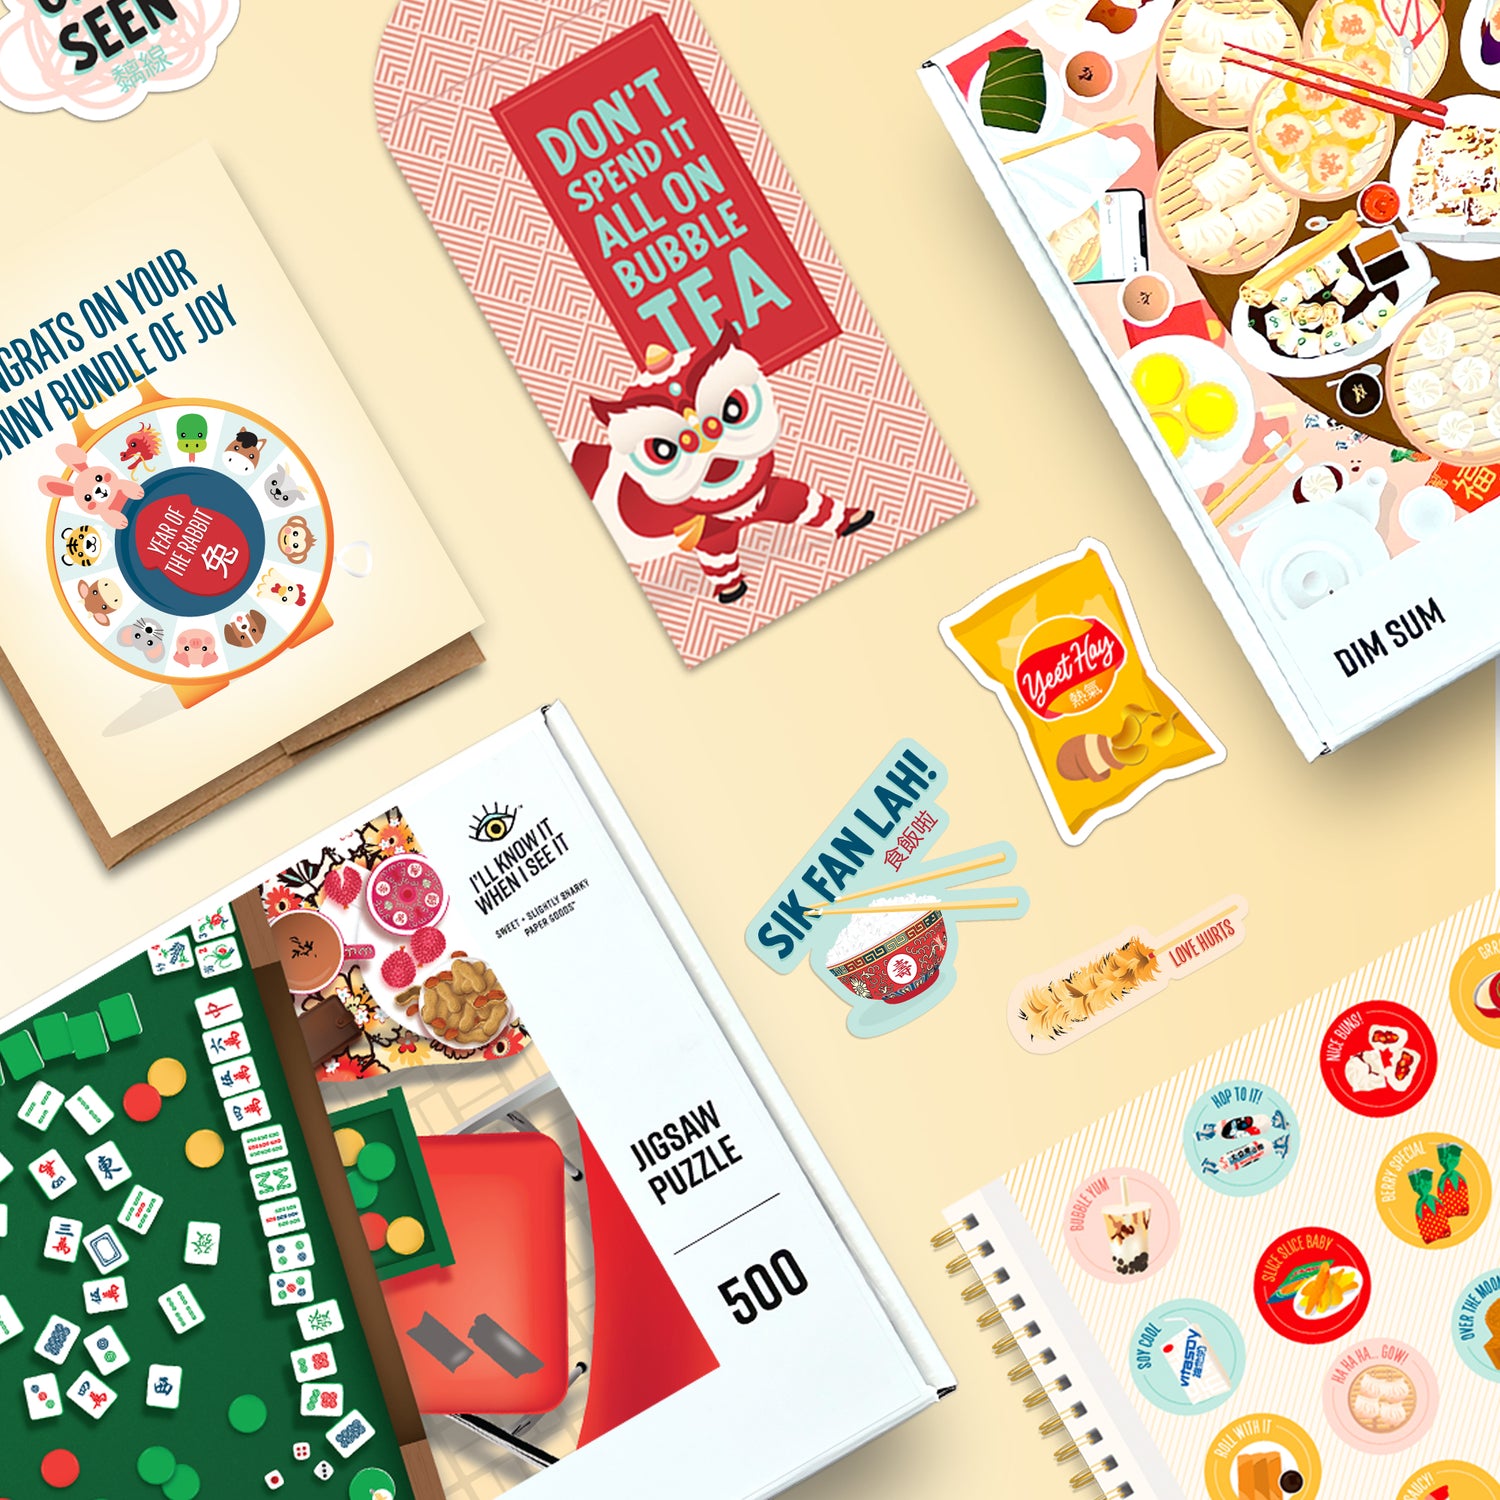 A selection of Asian-themed cards, stickers, magnets, notebooks, puzzles and red pockets by I&